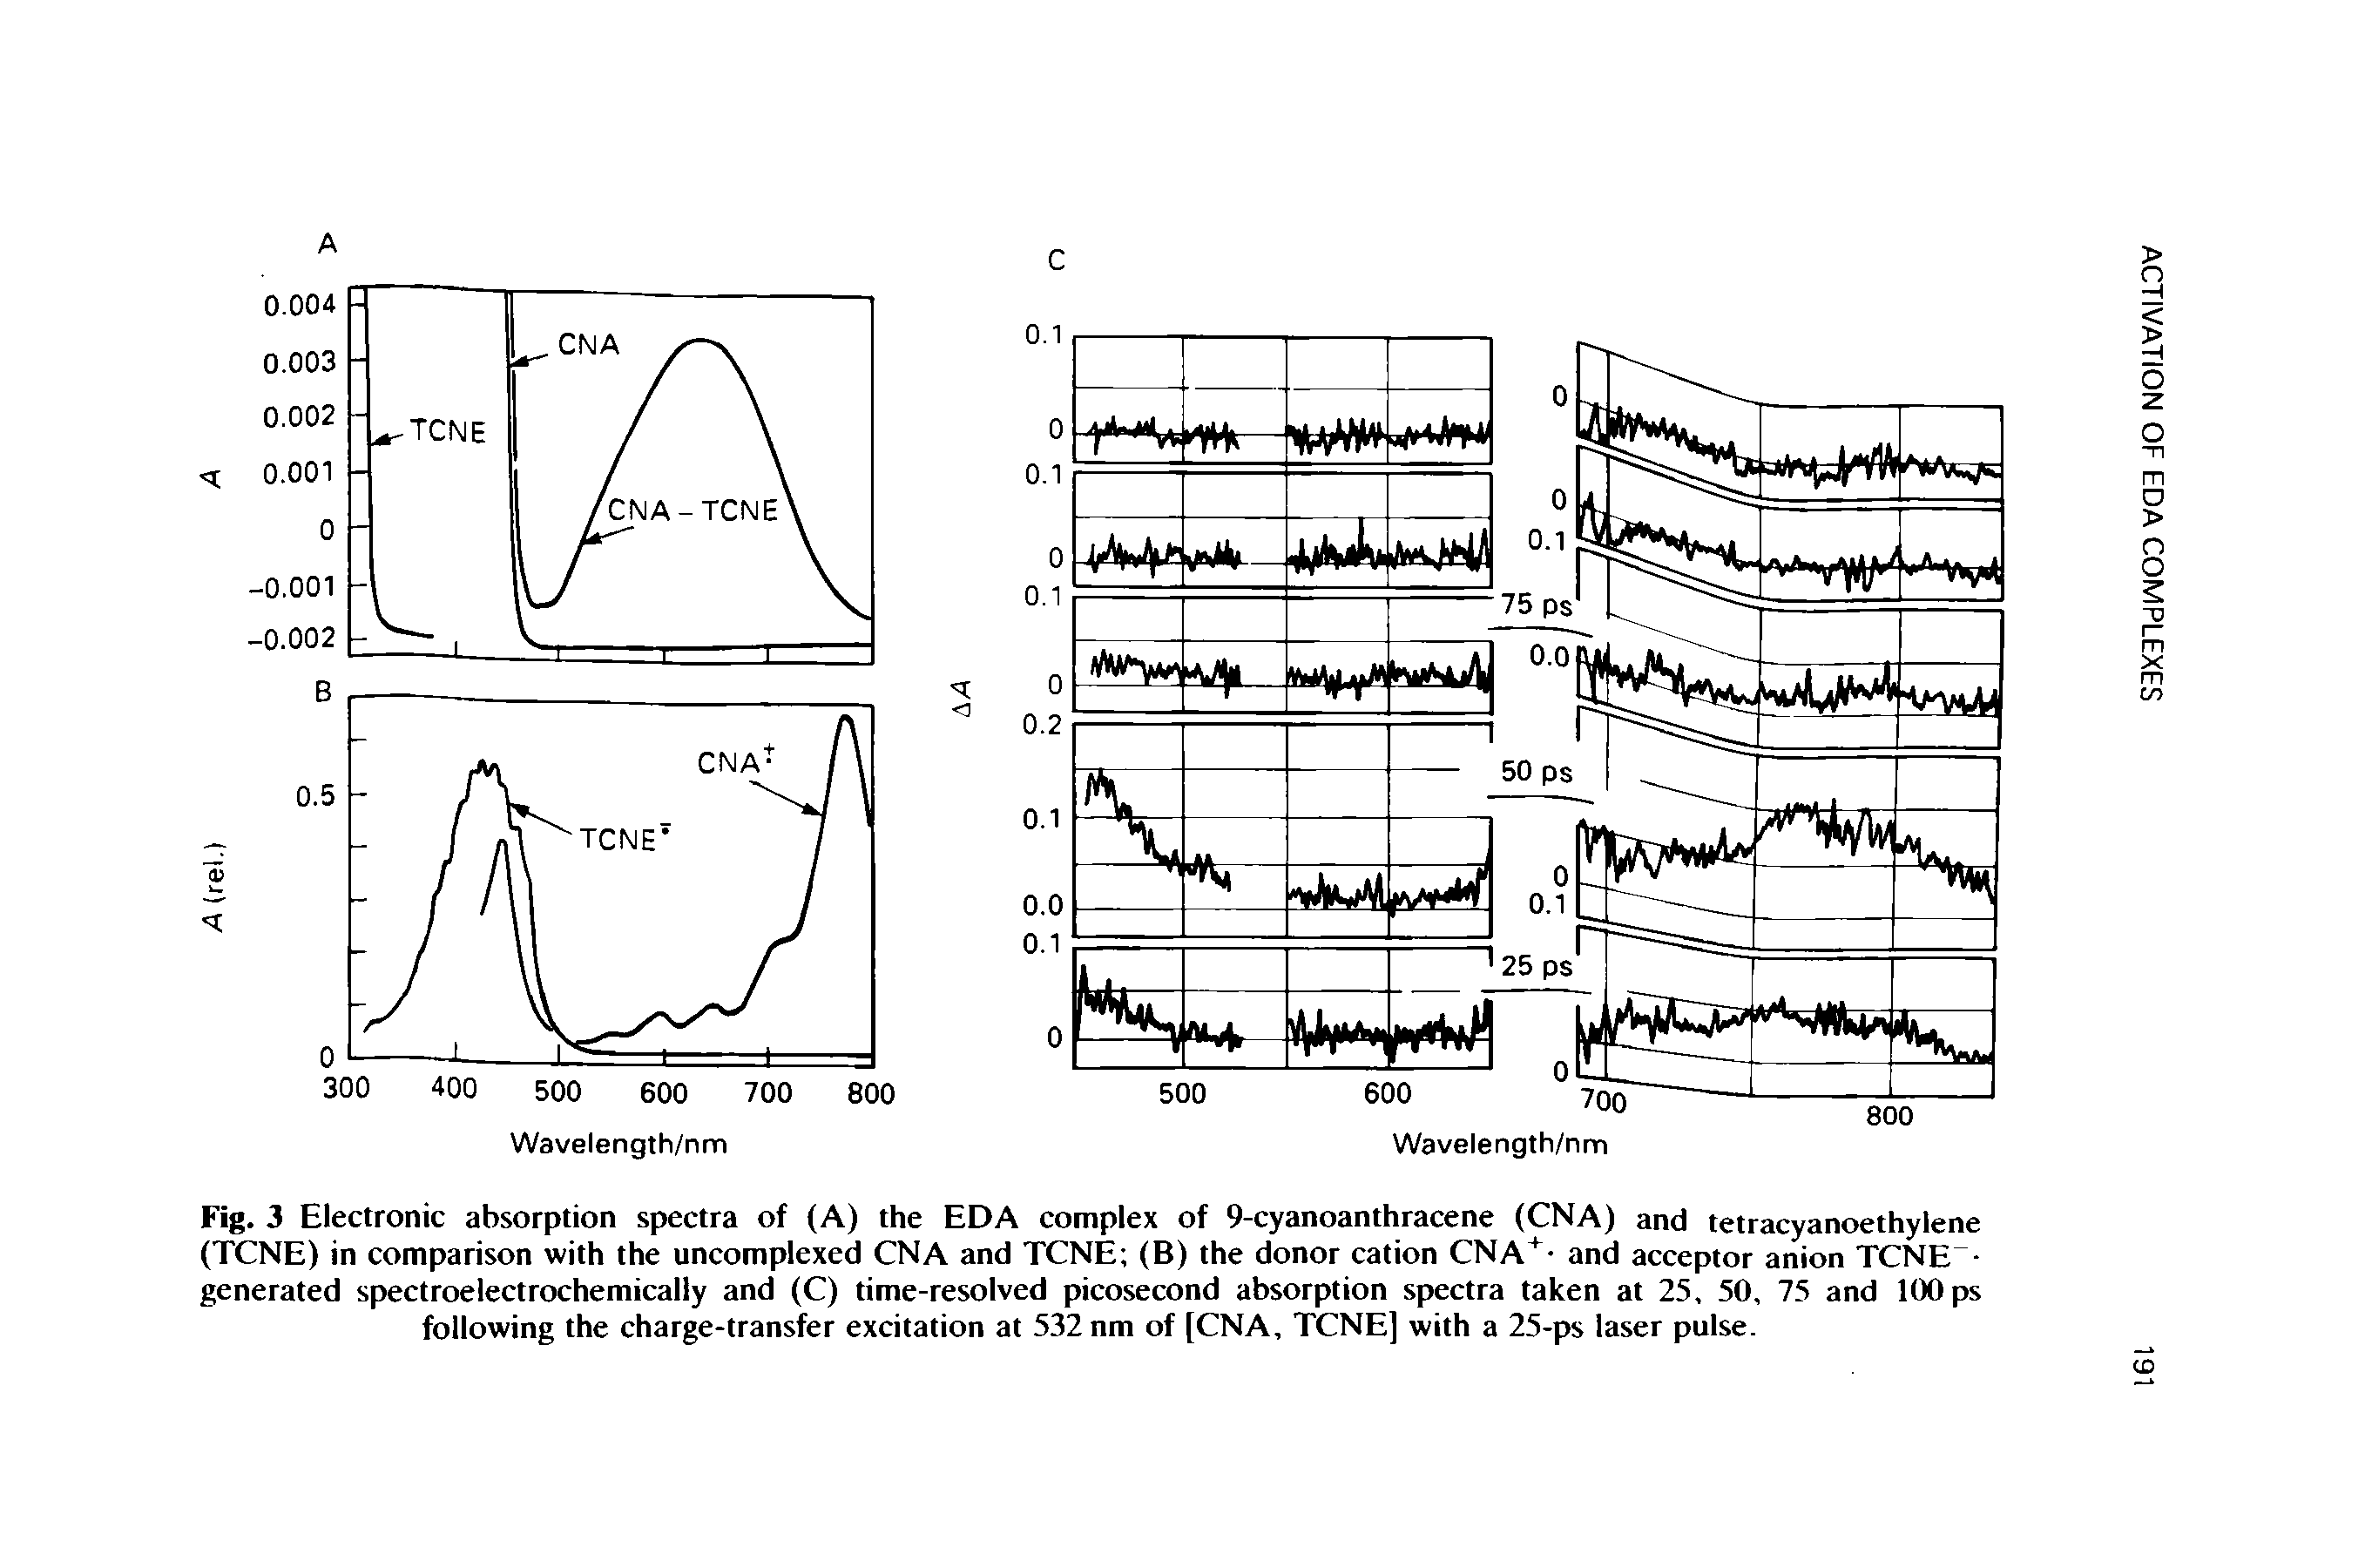 Fig. 3 Electronic absorption spectra of (A) the EDA complex of 9-cyanoanthracene (CNA) and tetracyanoethylene (TCNE) in comparison with the uncomplexed CNA and TCNE (B) the donor cation CNA+- and acceptor anion TCNE -generated spectroelectrochemically and (C) time-resolved picosecond absorption spectra taken at 25, 50, 75 and lOOps following the charge-transfer excitation at 532 nm of [CNA, TCNE] with a 25-ps laser pulse.